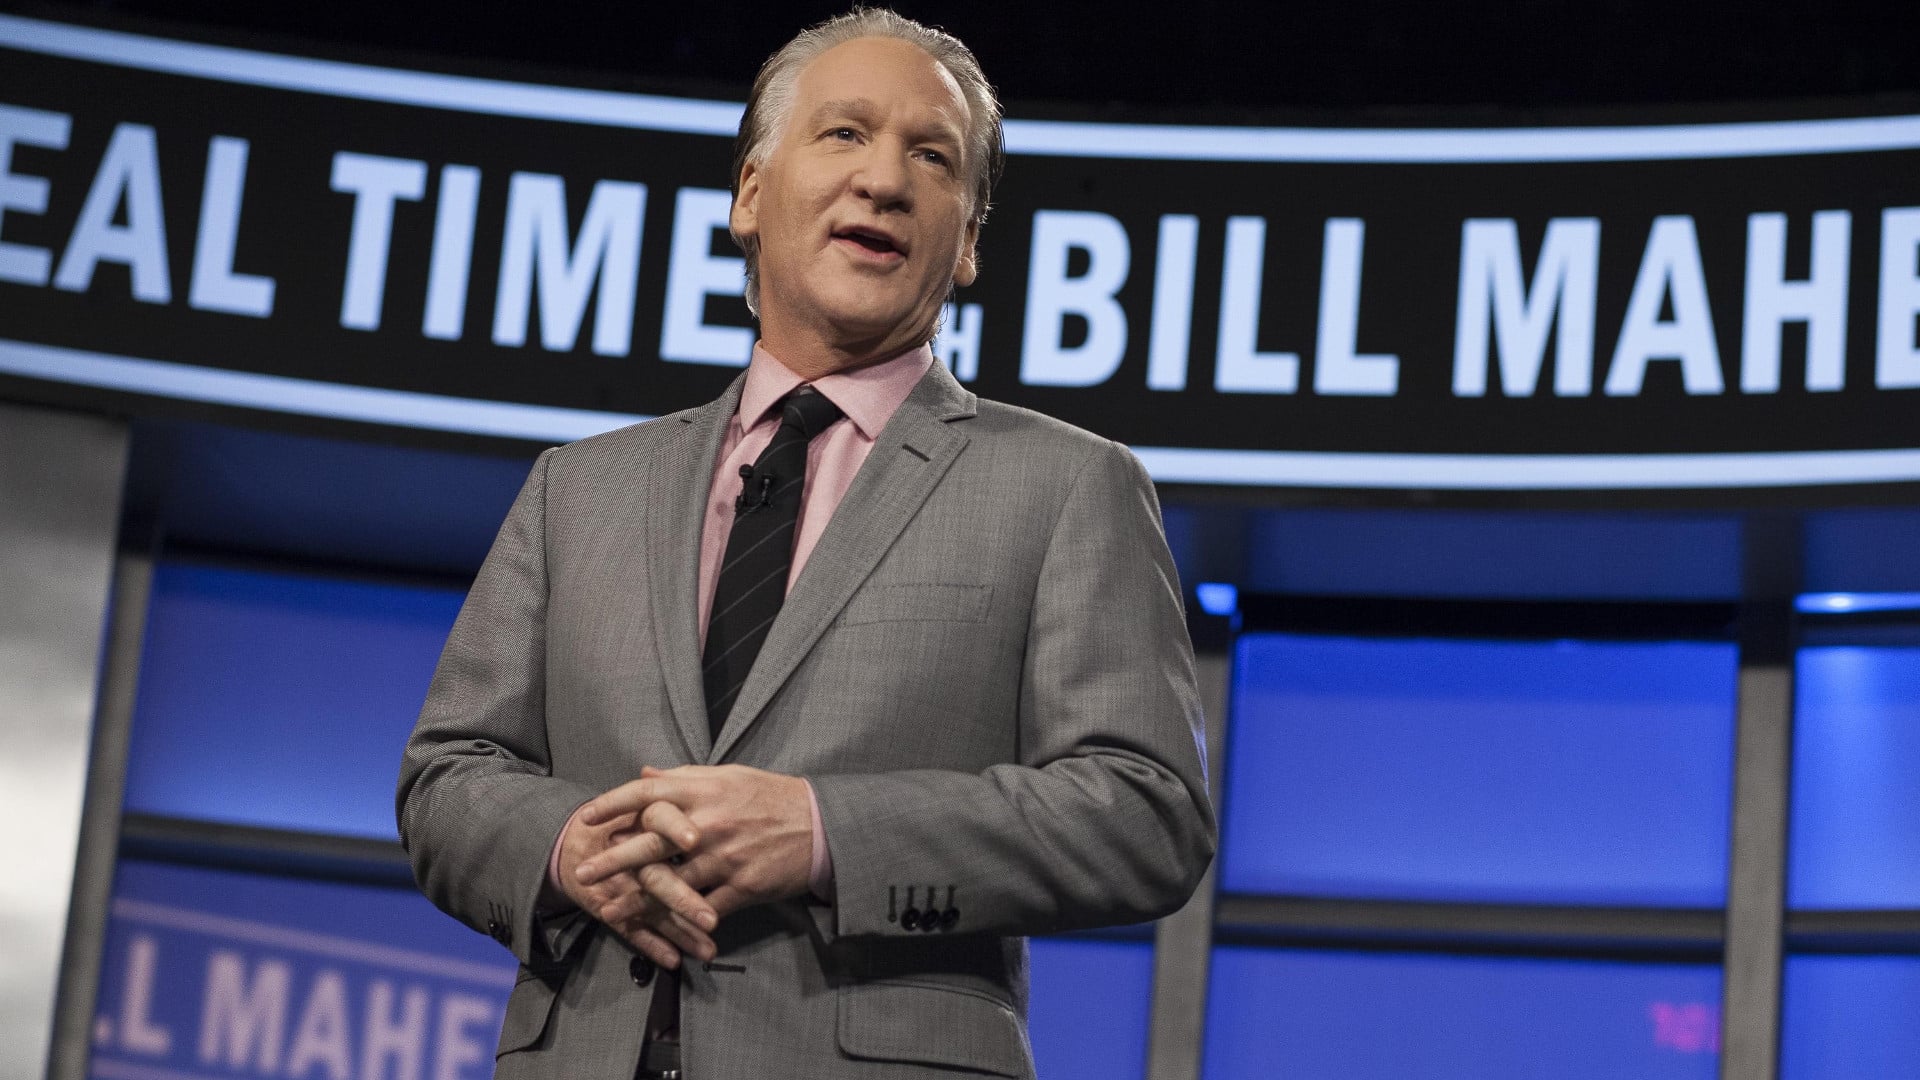 Real Time with Bill Maher - Season 22 Episode 12